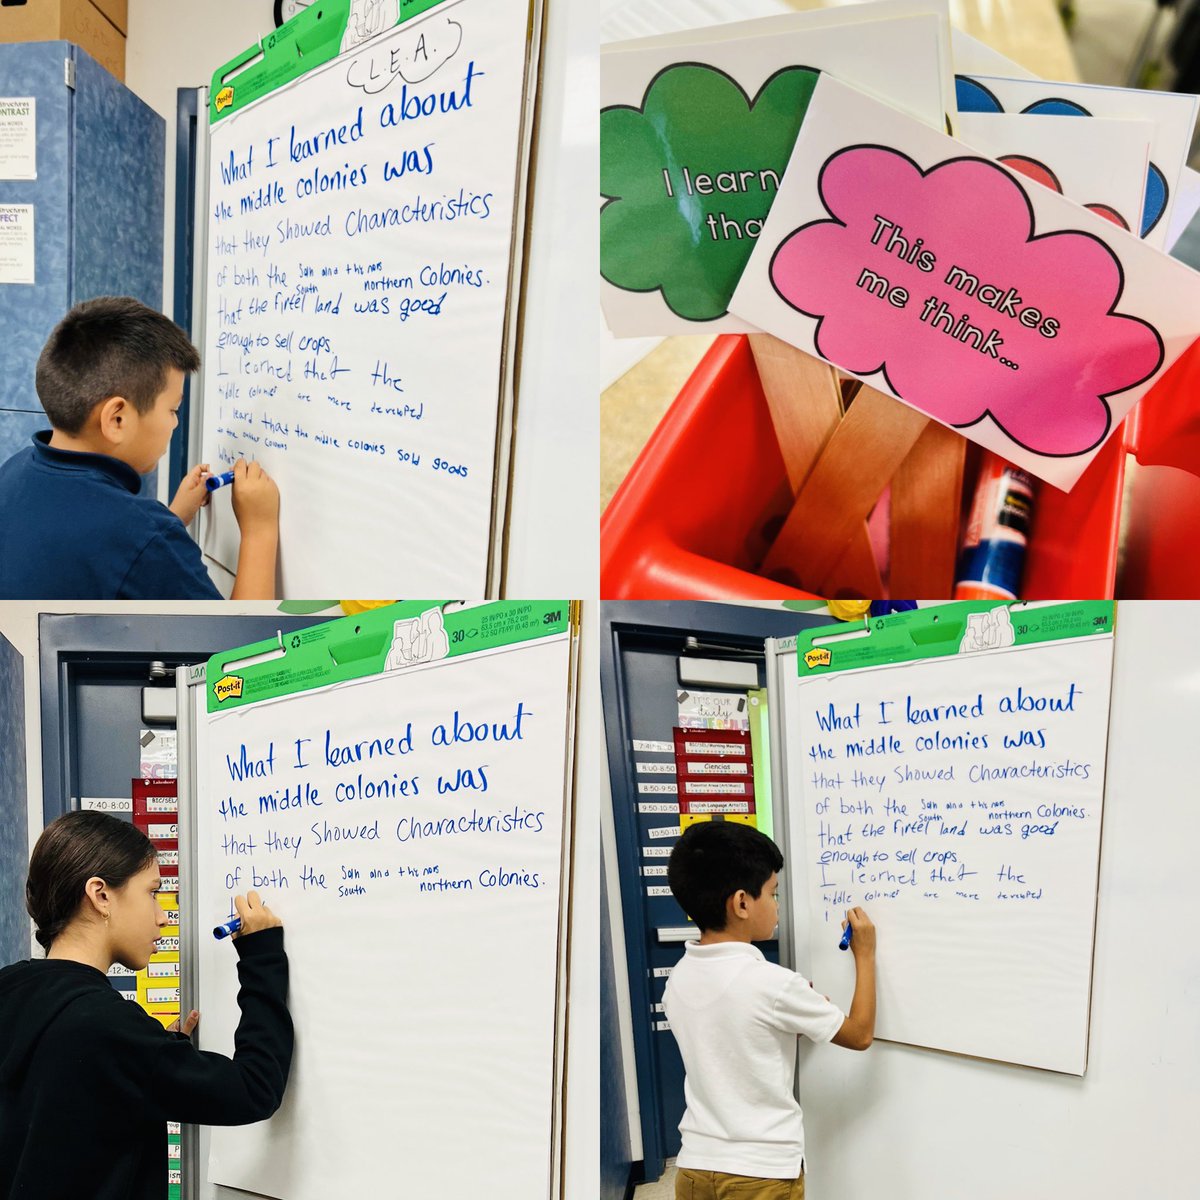 P2: Proud of my students’collaborative learning experiences. They were all able to contribute meaningfully as readers and writers. Language Experience Approach (LEA) connects content and literacy. @nunezOpatricia 
@MiriamOrtizz07 @Juliahdz01 #SomosAISD #aisdmultilingual